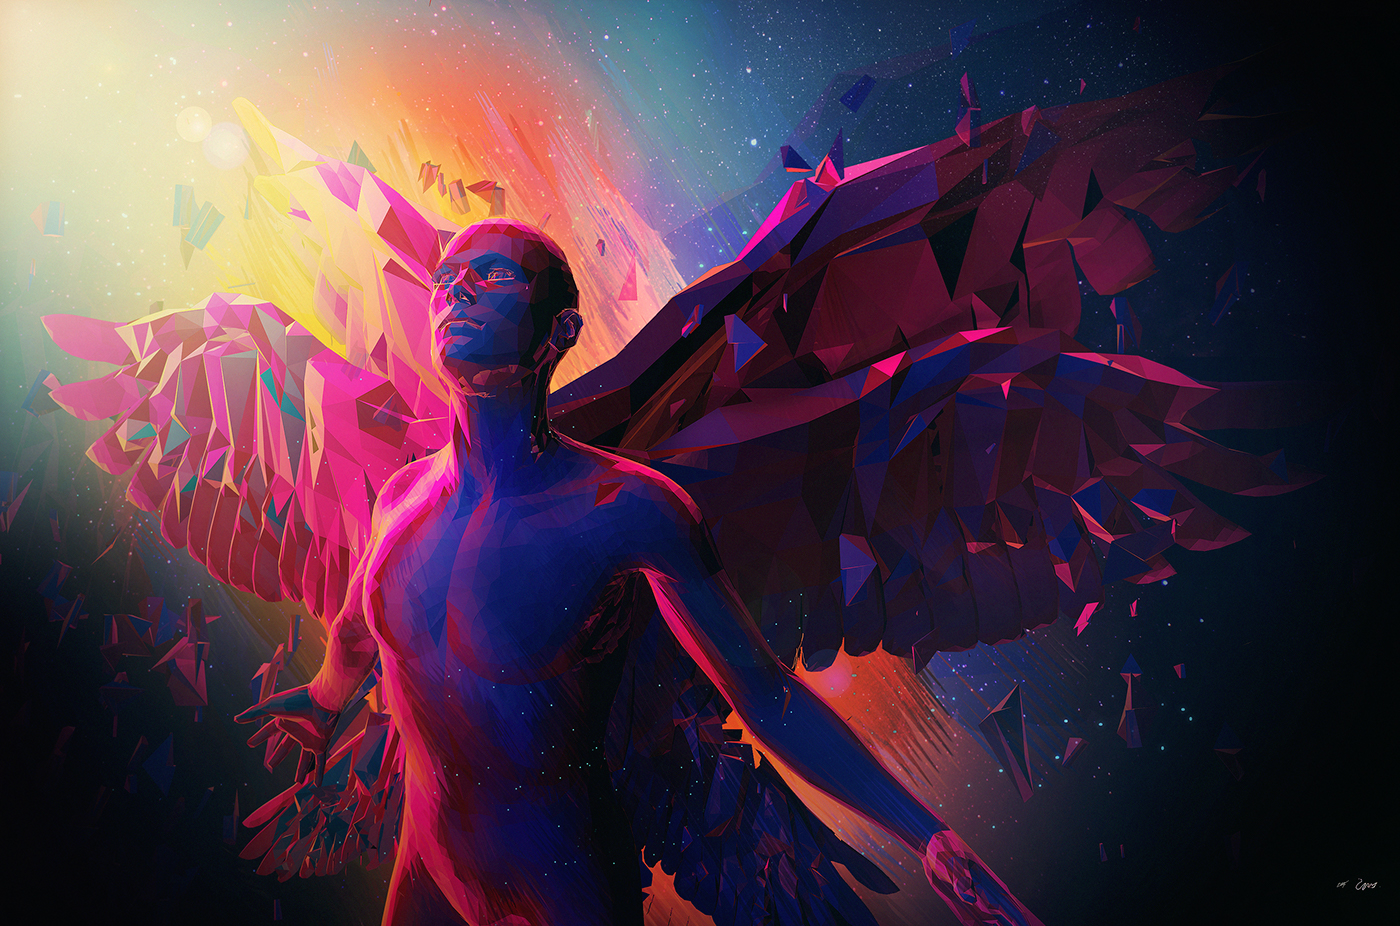 engel angel cosmosys koyn colour lowpoly LOW poly artgroup Collective  allotopia cosmosysm